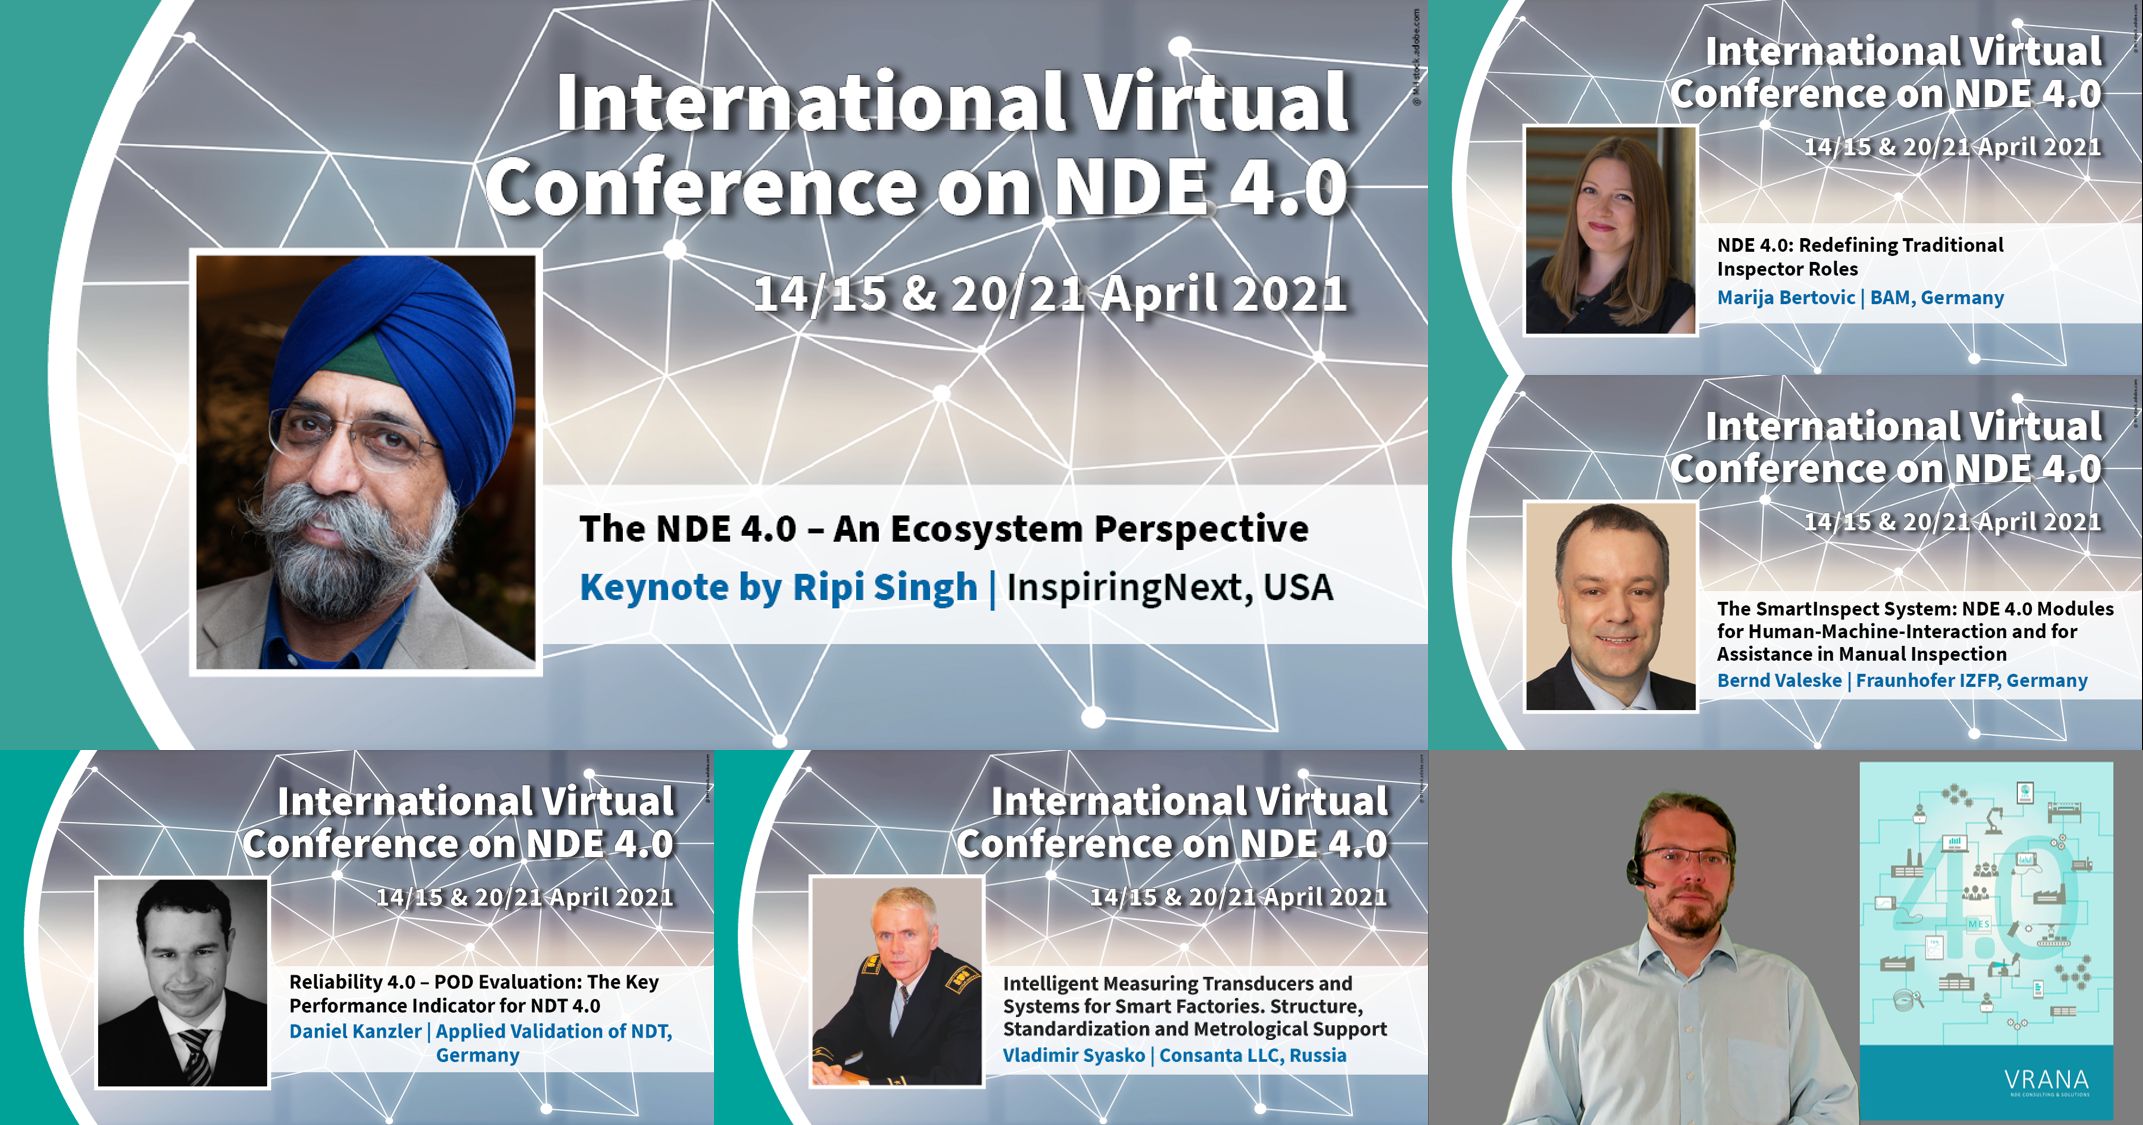 1st International Conference on NDE 4.0: The Invited Speakers of the General NDE 4.0 Session